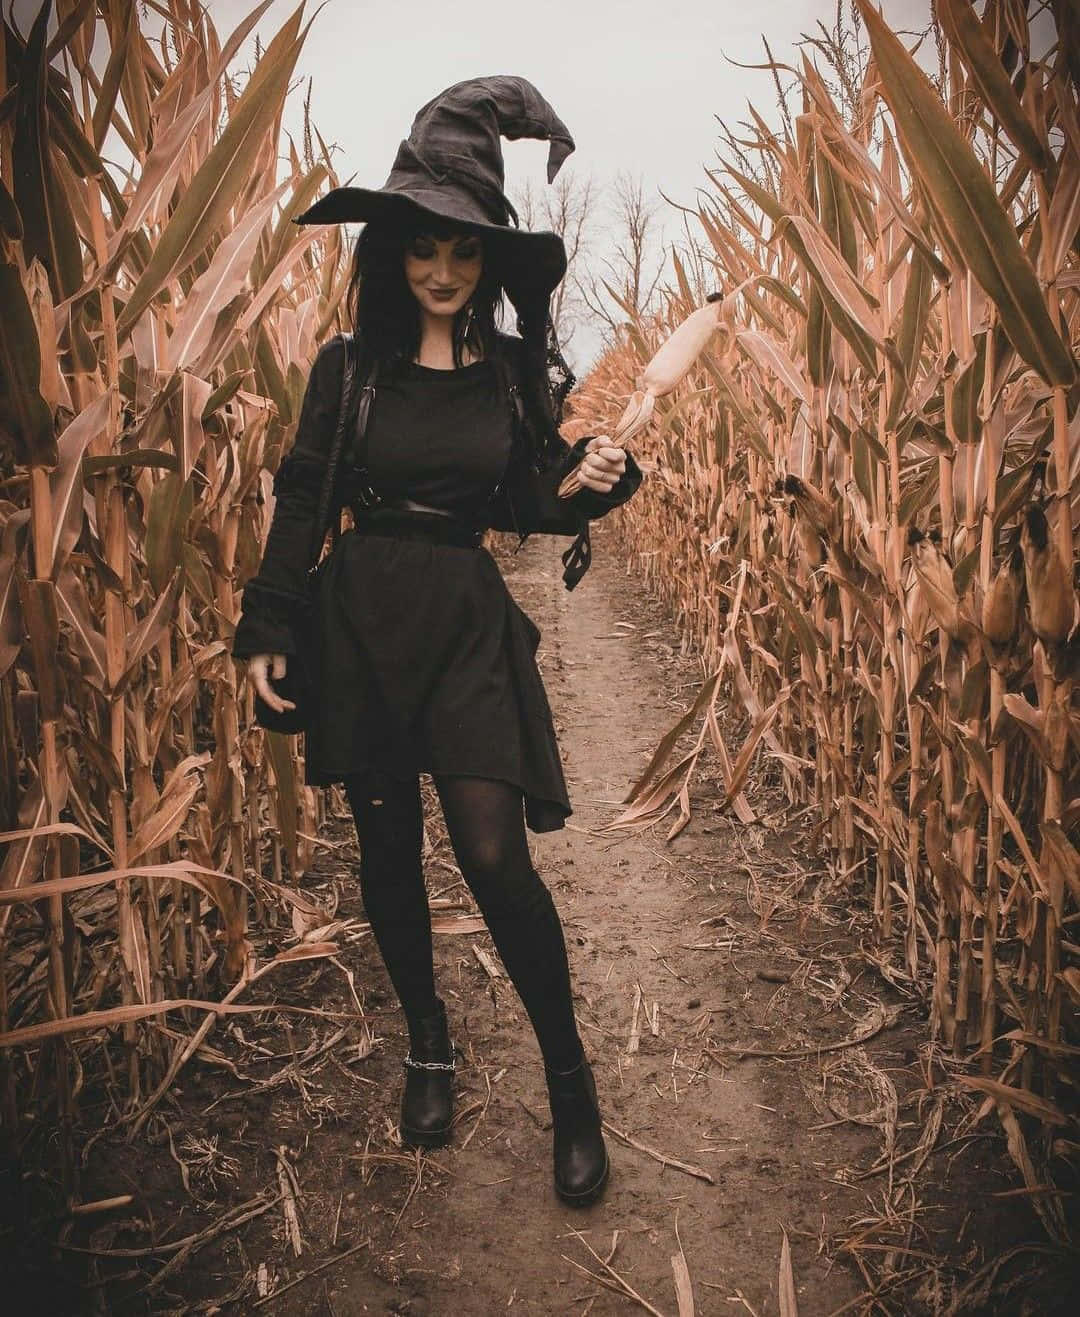 Enthralling Witch Halloween Costume Wallpaper